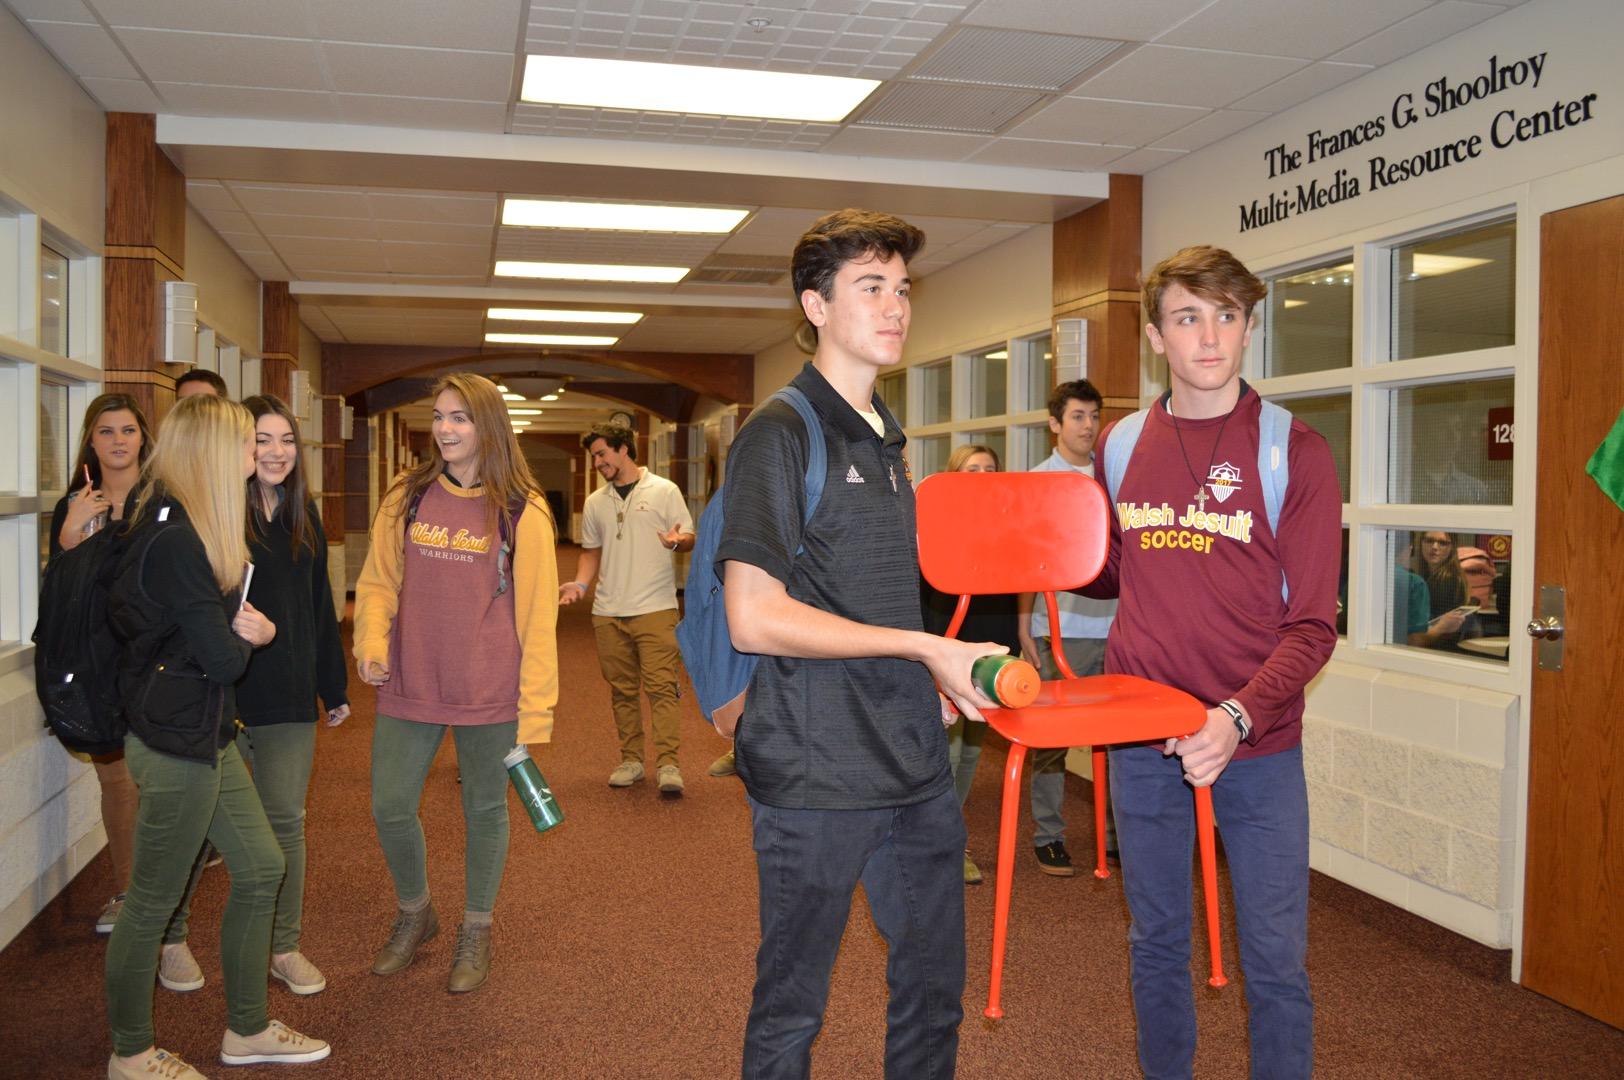 Seniors Roman Gioglio and Nico Clarke carry the Red Chair to their next class through a busy hallway. 